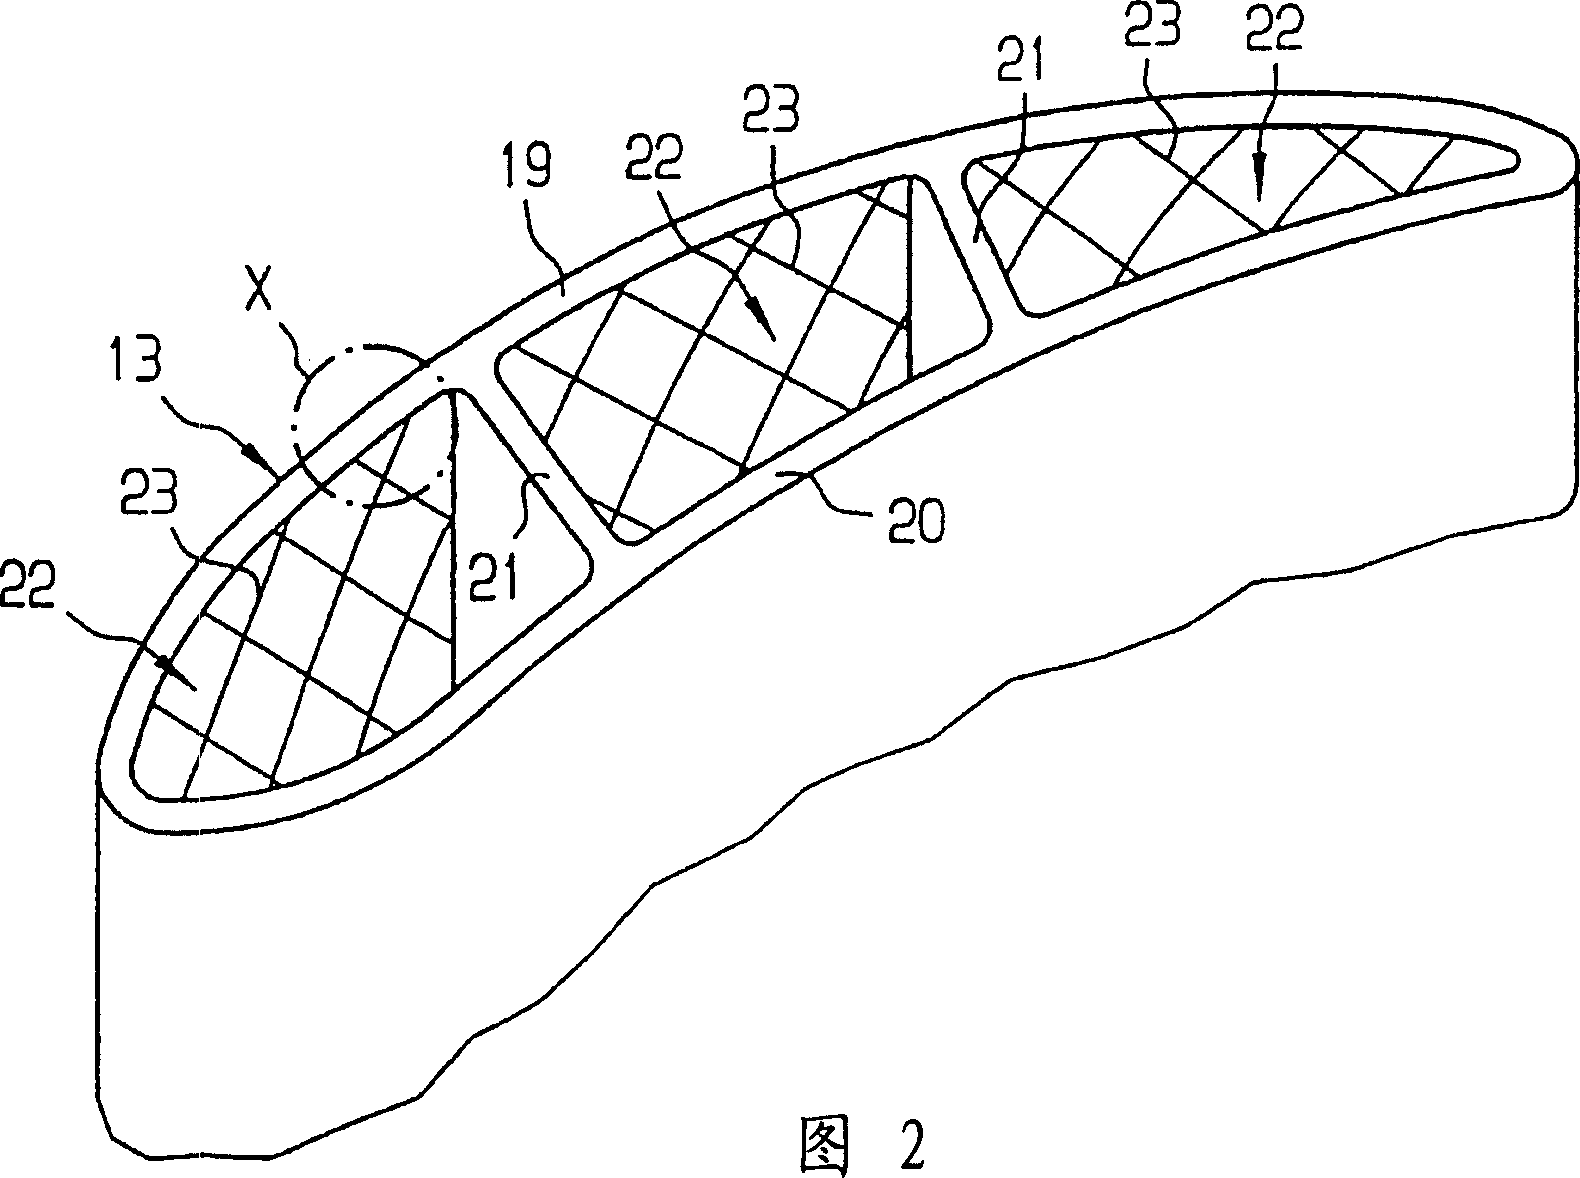 Reinforcement and cooling structure of a turbine blade